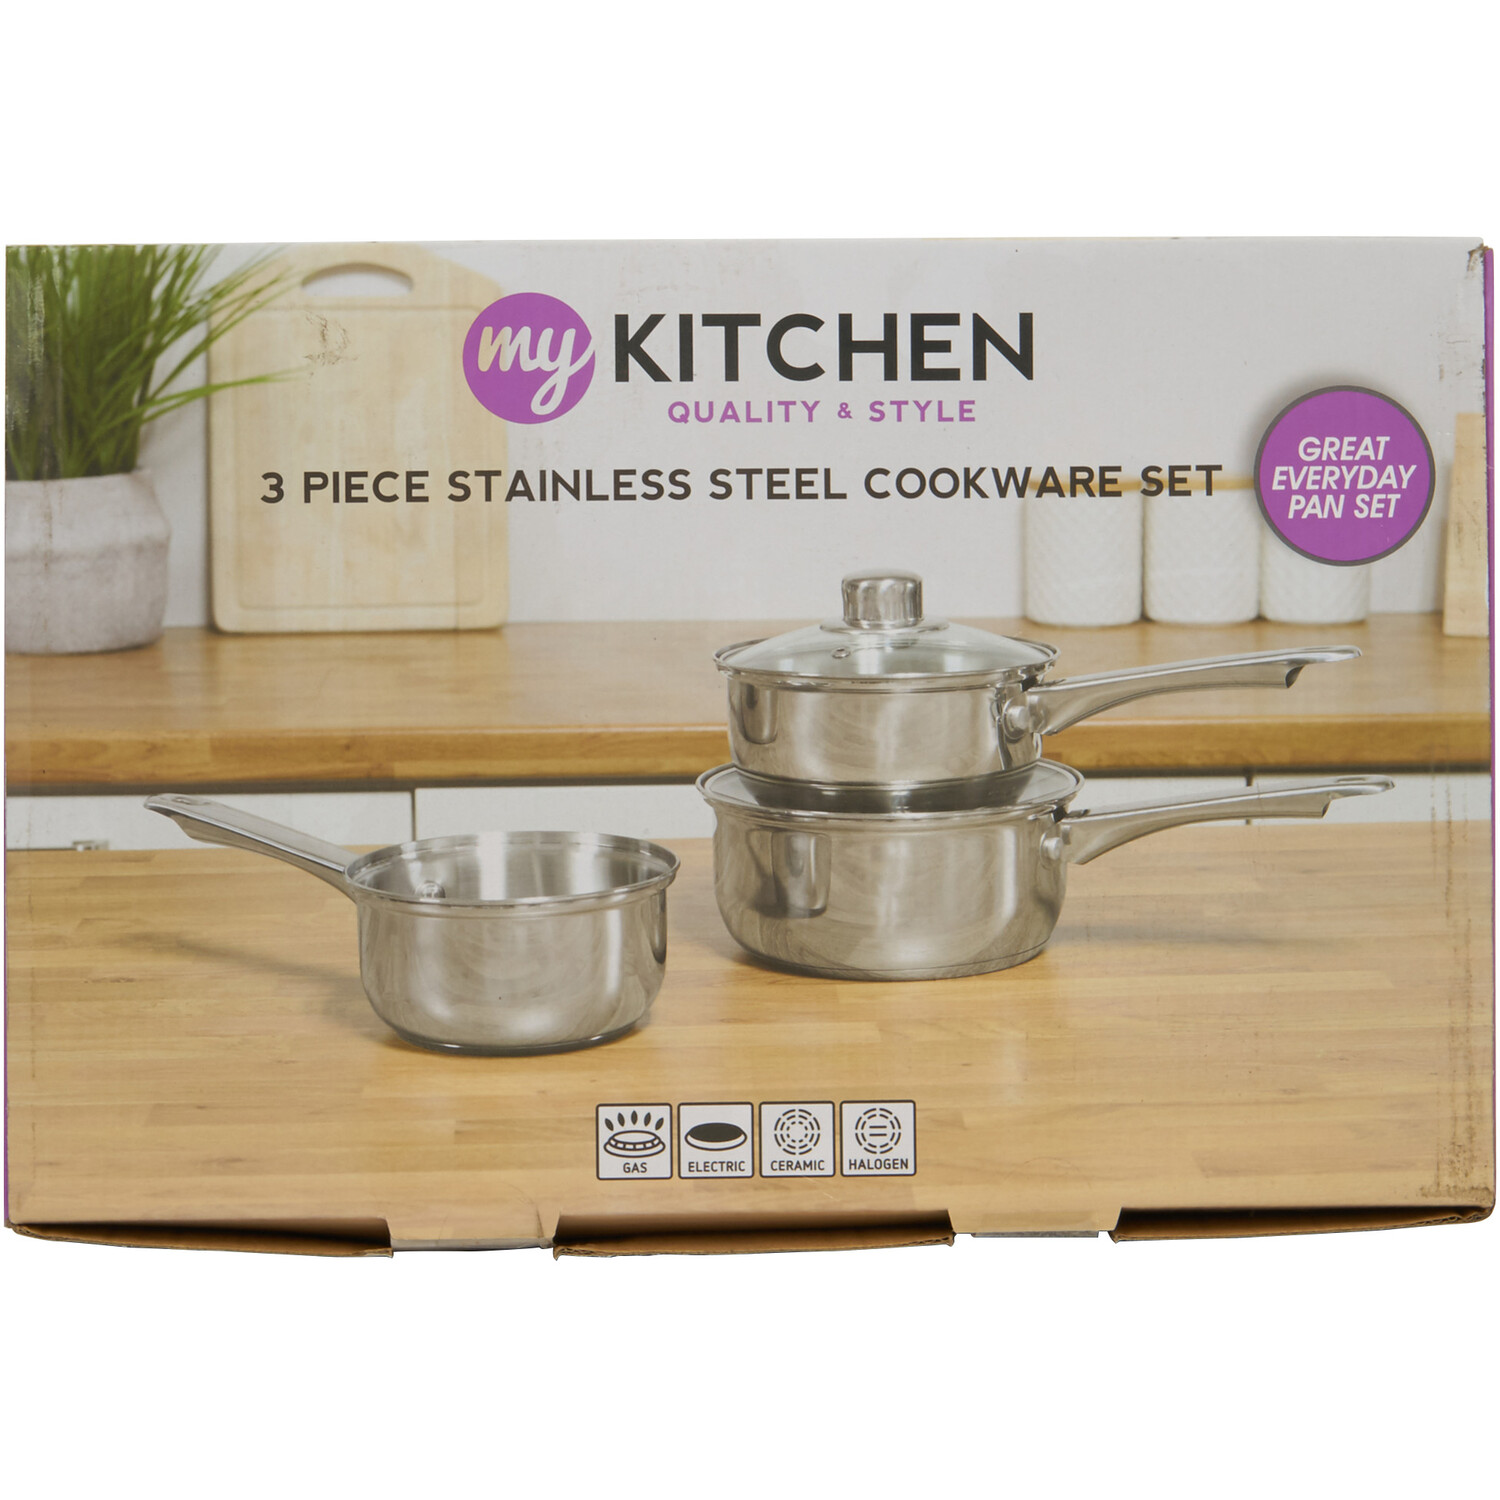 My Kitchen 3 Piece Stainless Steel Cookware Set - Chrome Image 2